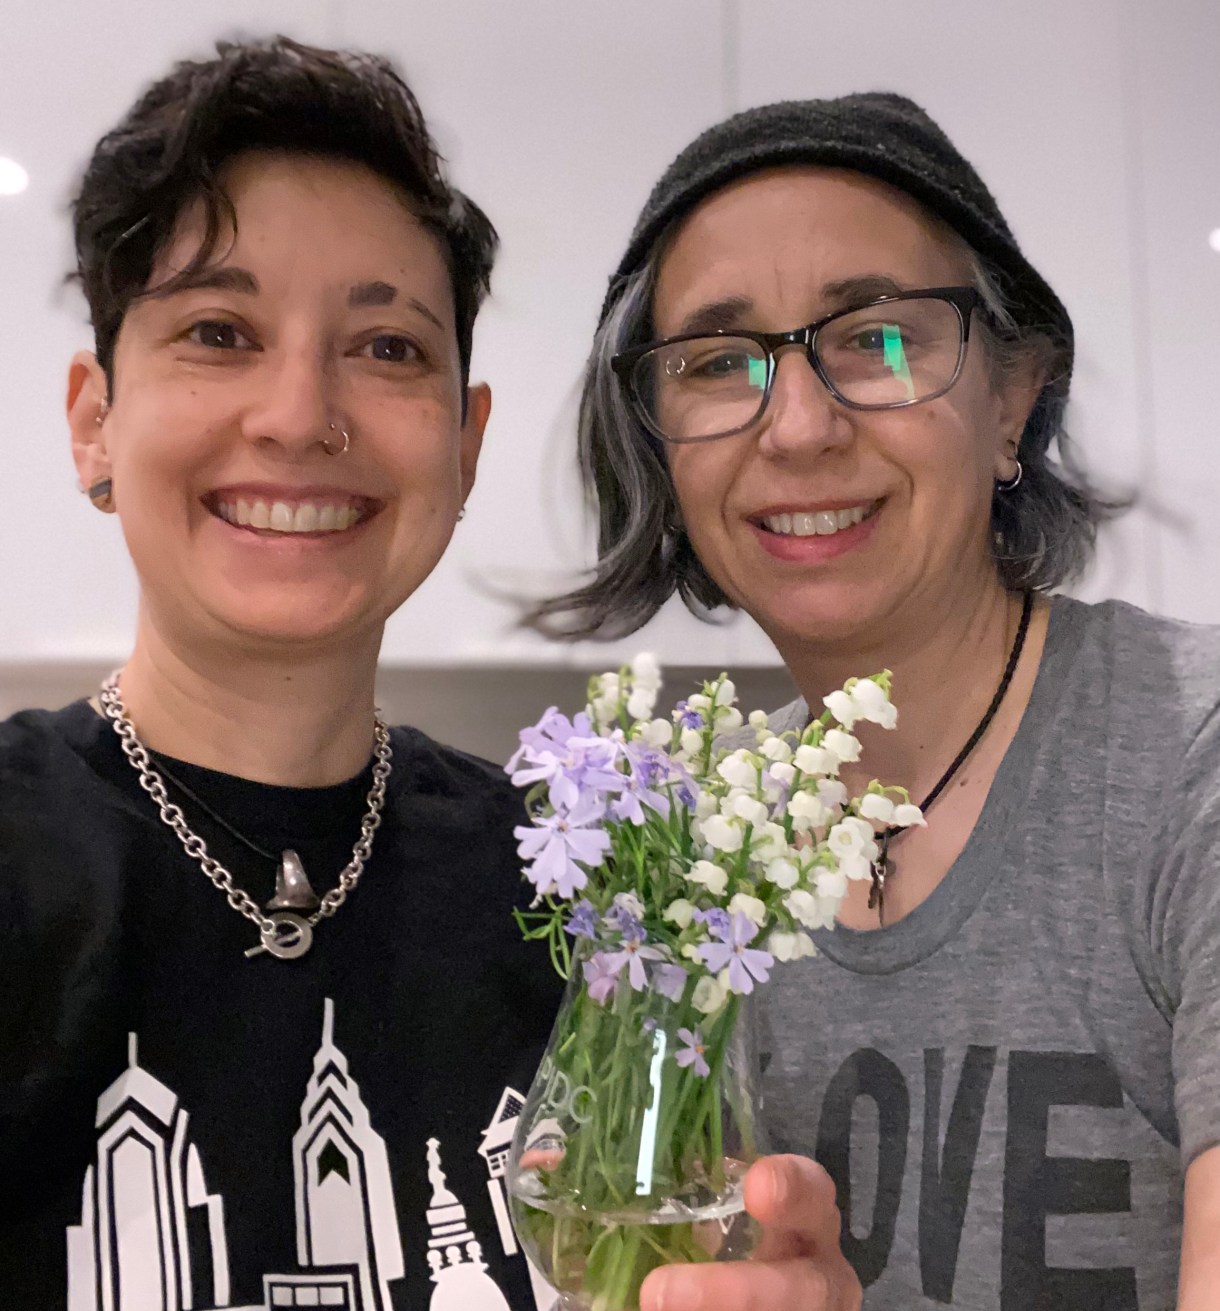 Tracy and Mia from Yikes our tech team hold up a vase of beautiful little flowers. Tracy is an Asian woman with short black hair and a nose piercing and Mia is a white woman with gray hair  who is wearing glasses and a beanie.